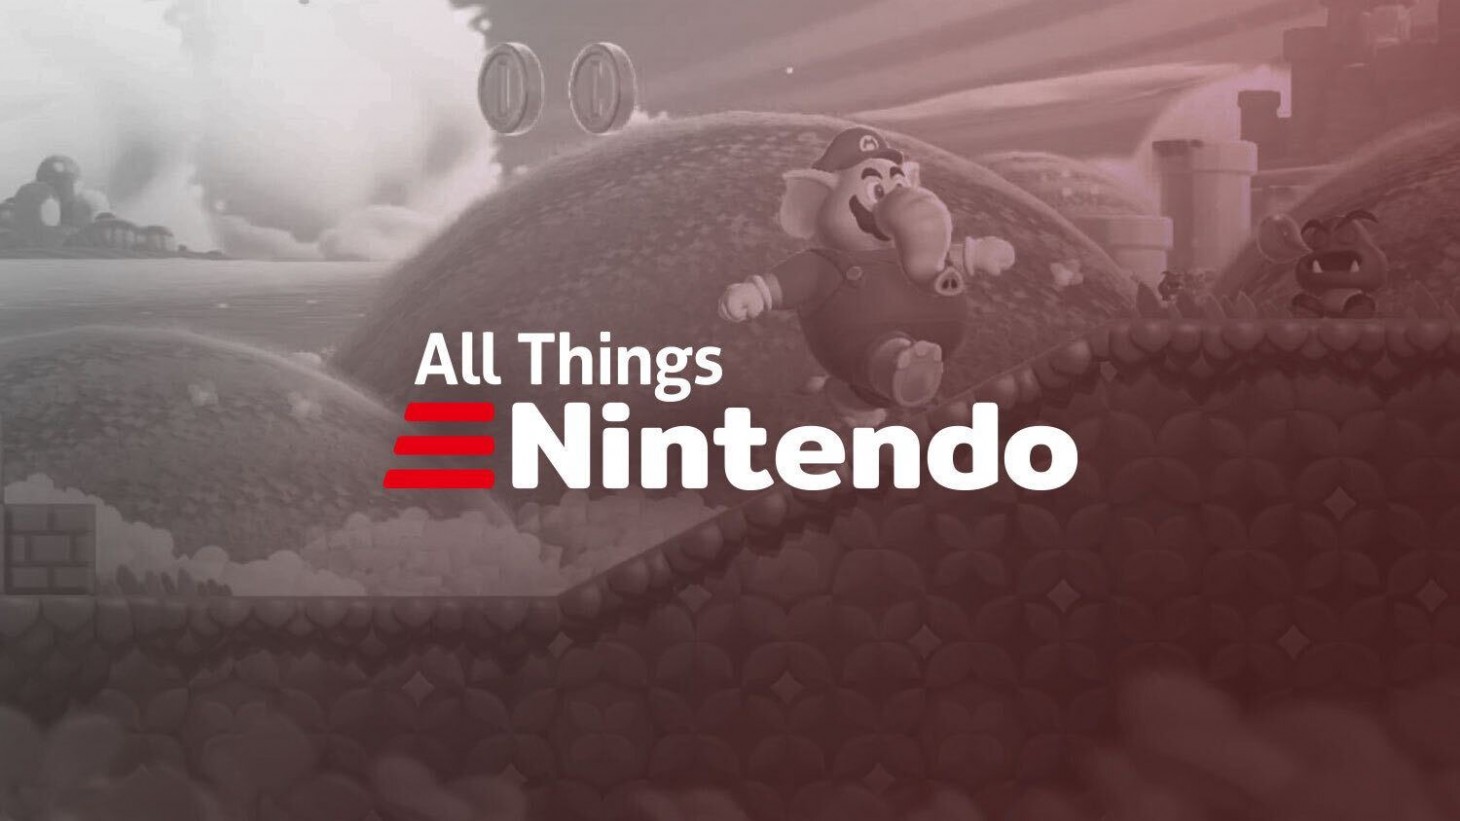 Nintendo Direct on June 21: schedules, where to watch and details